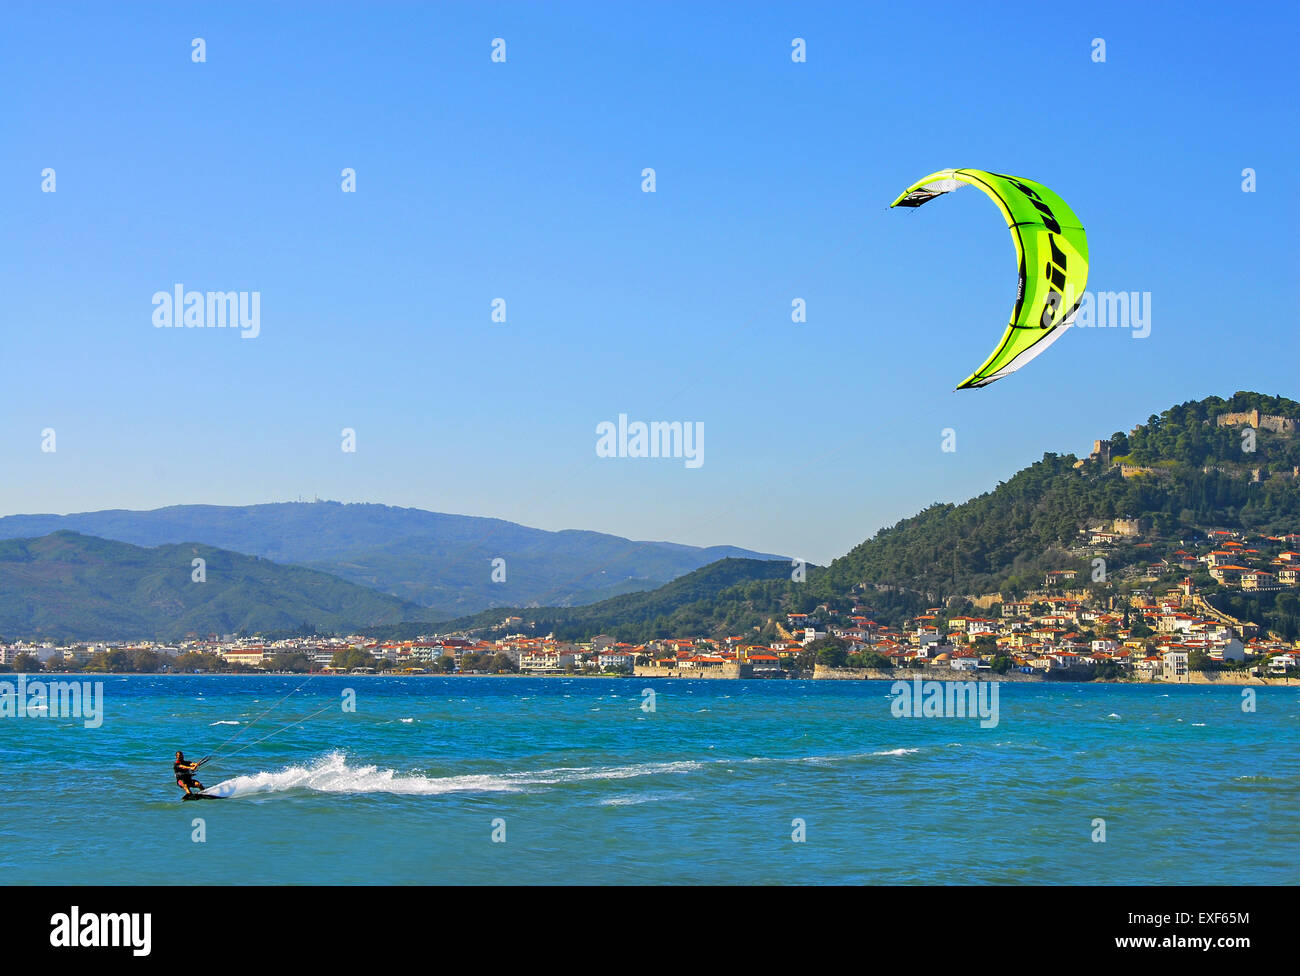 Water sports at Gribovo beach, at the seafront of Nafpaktos town and its castle in Aetoloacarnania region,  Greece Stock Photo